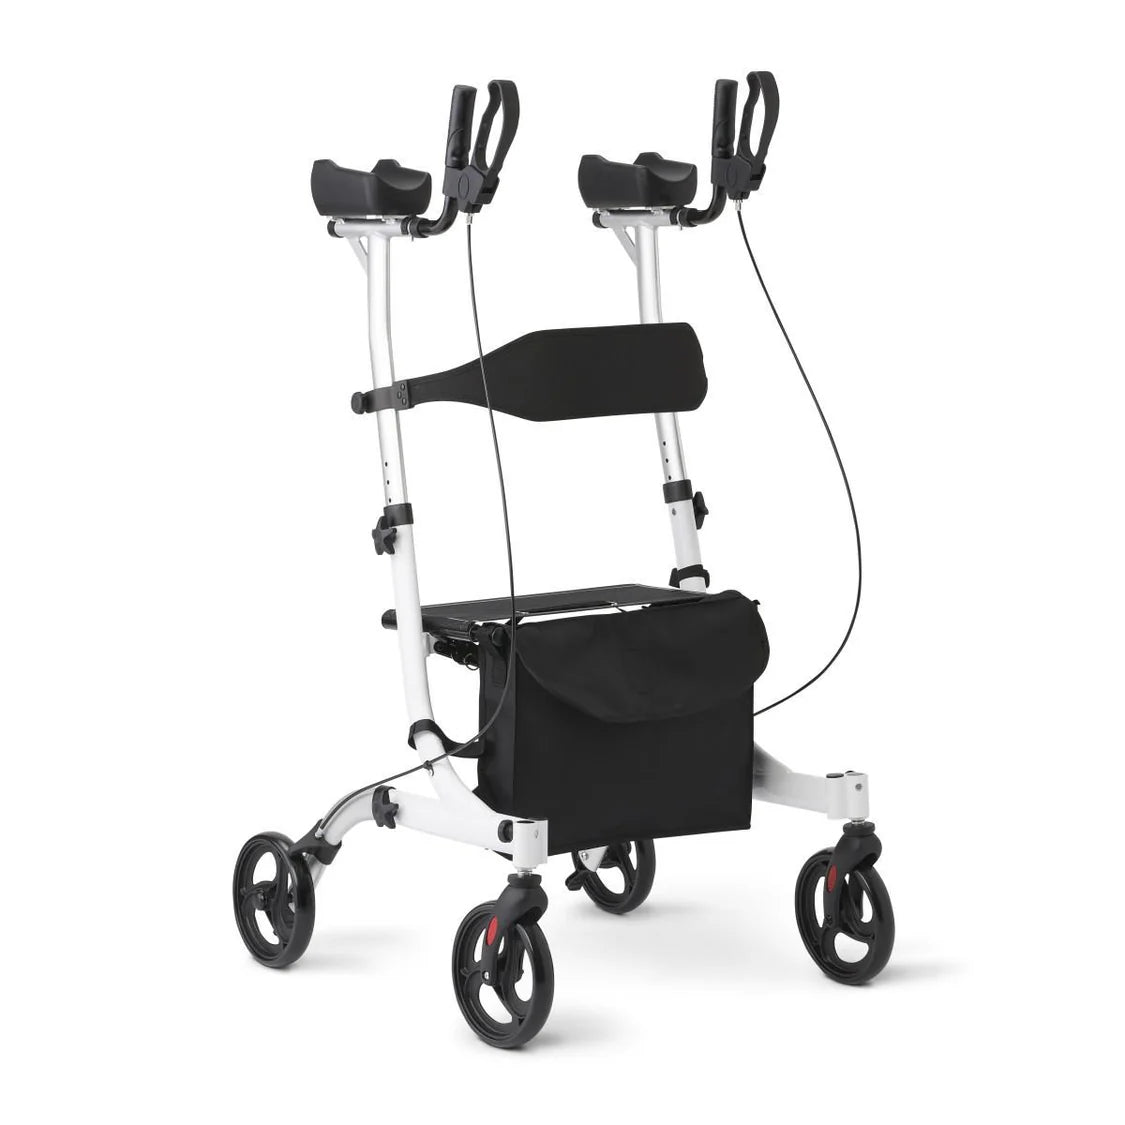 What Is The Difference Between A Rollator And A Walker